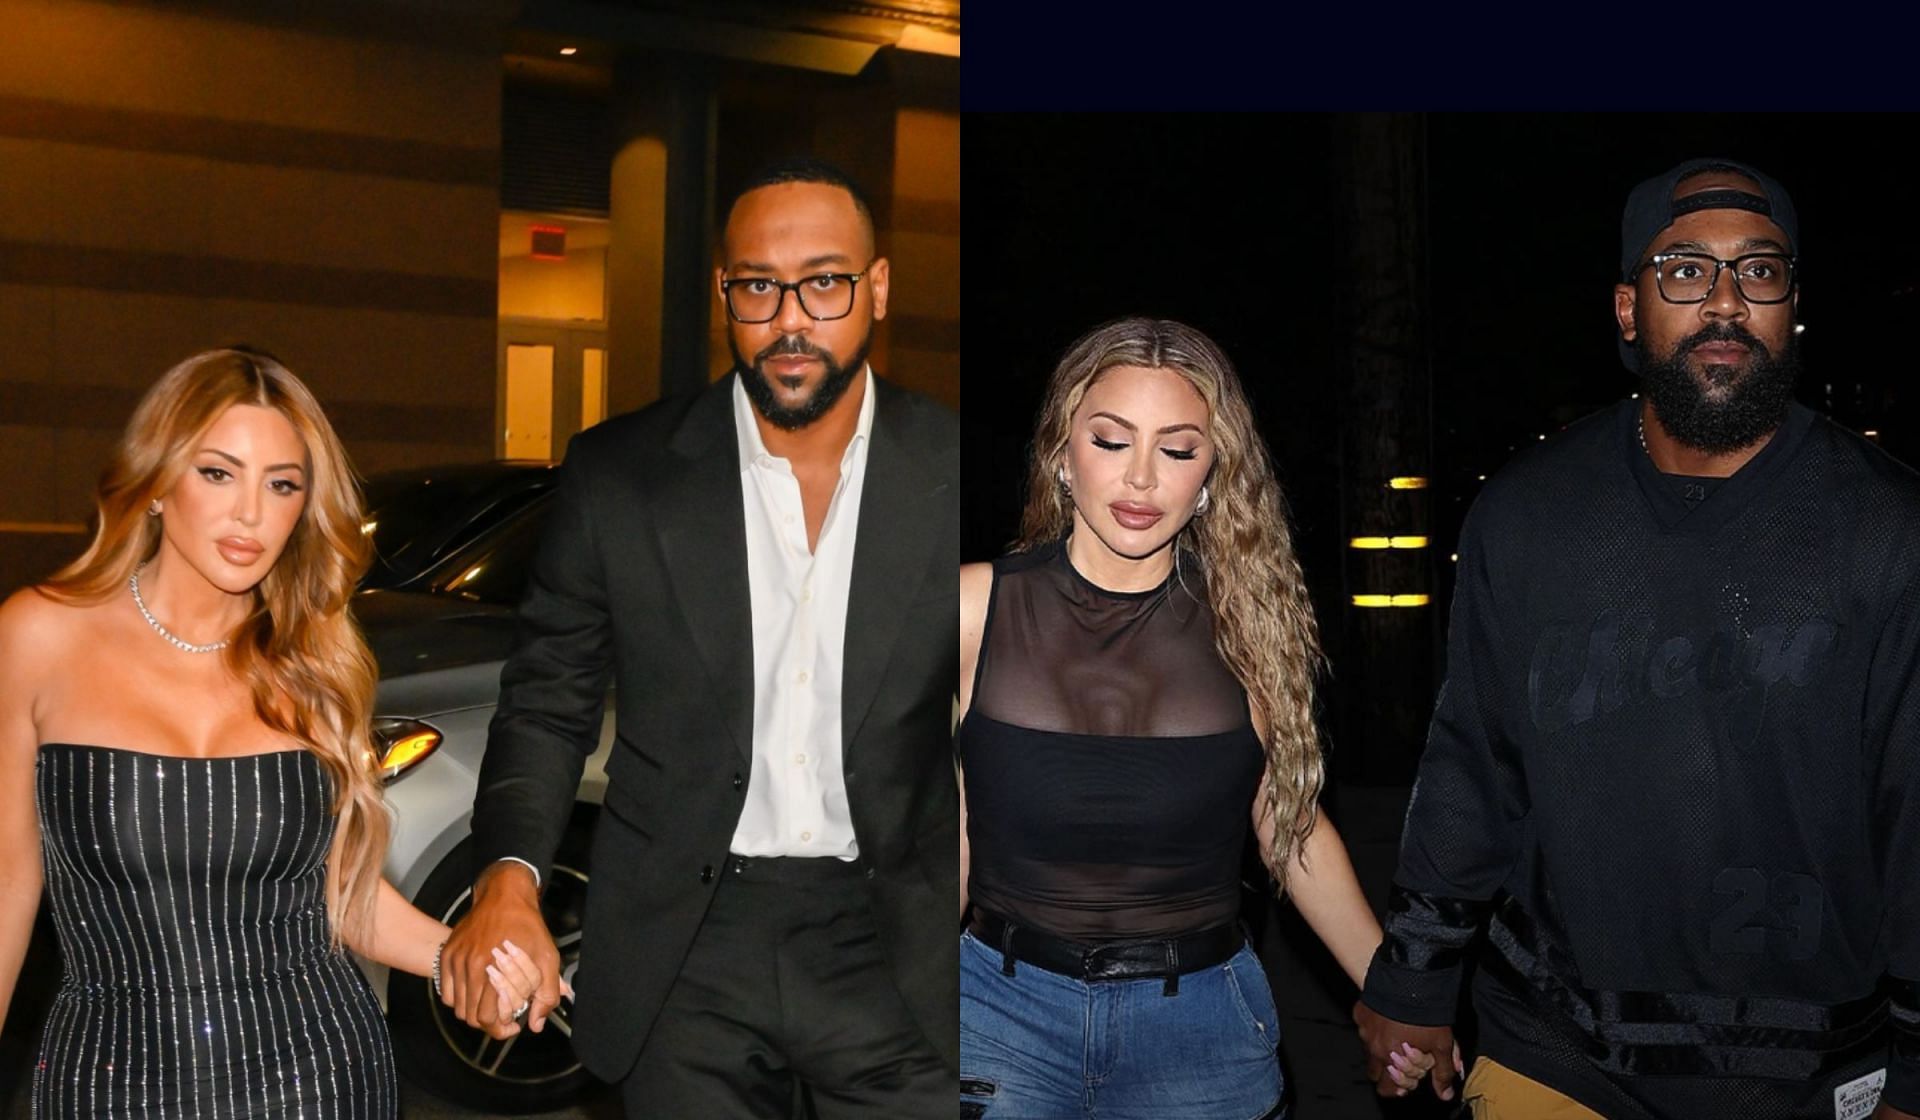 Larsa Pippen breaks silence on relationship issues with Marcus Jordan and cryptic IG activity: &quot;A month of us not seeing eye to eye&quot; 